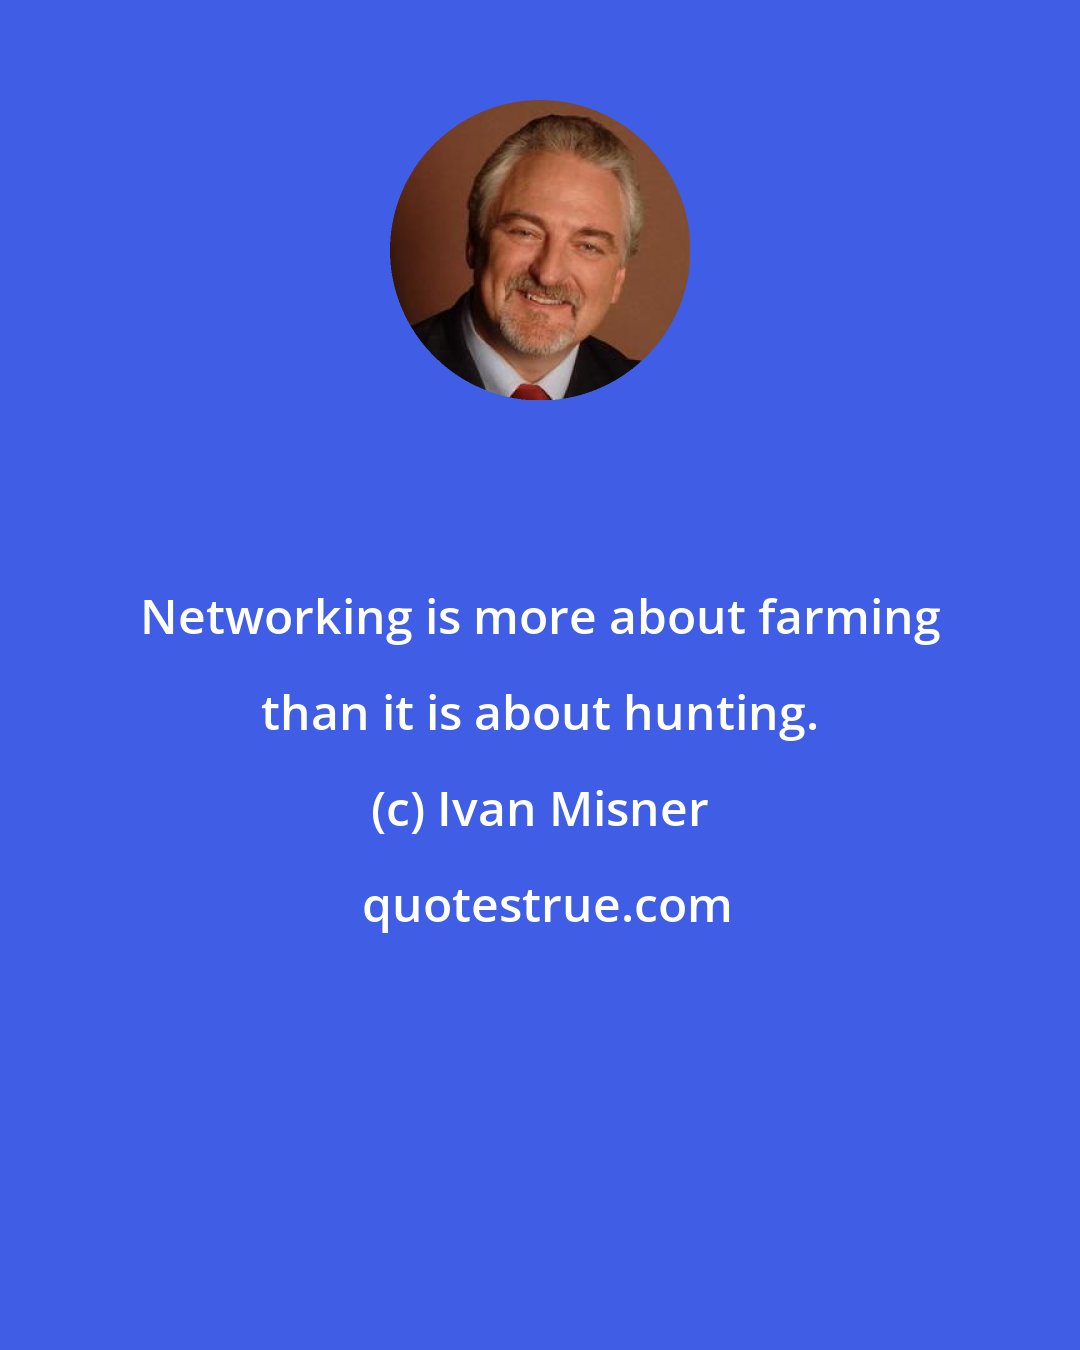 Ivan Misner: Networking is more about farming than it is about hunting.